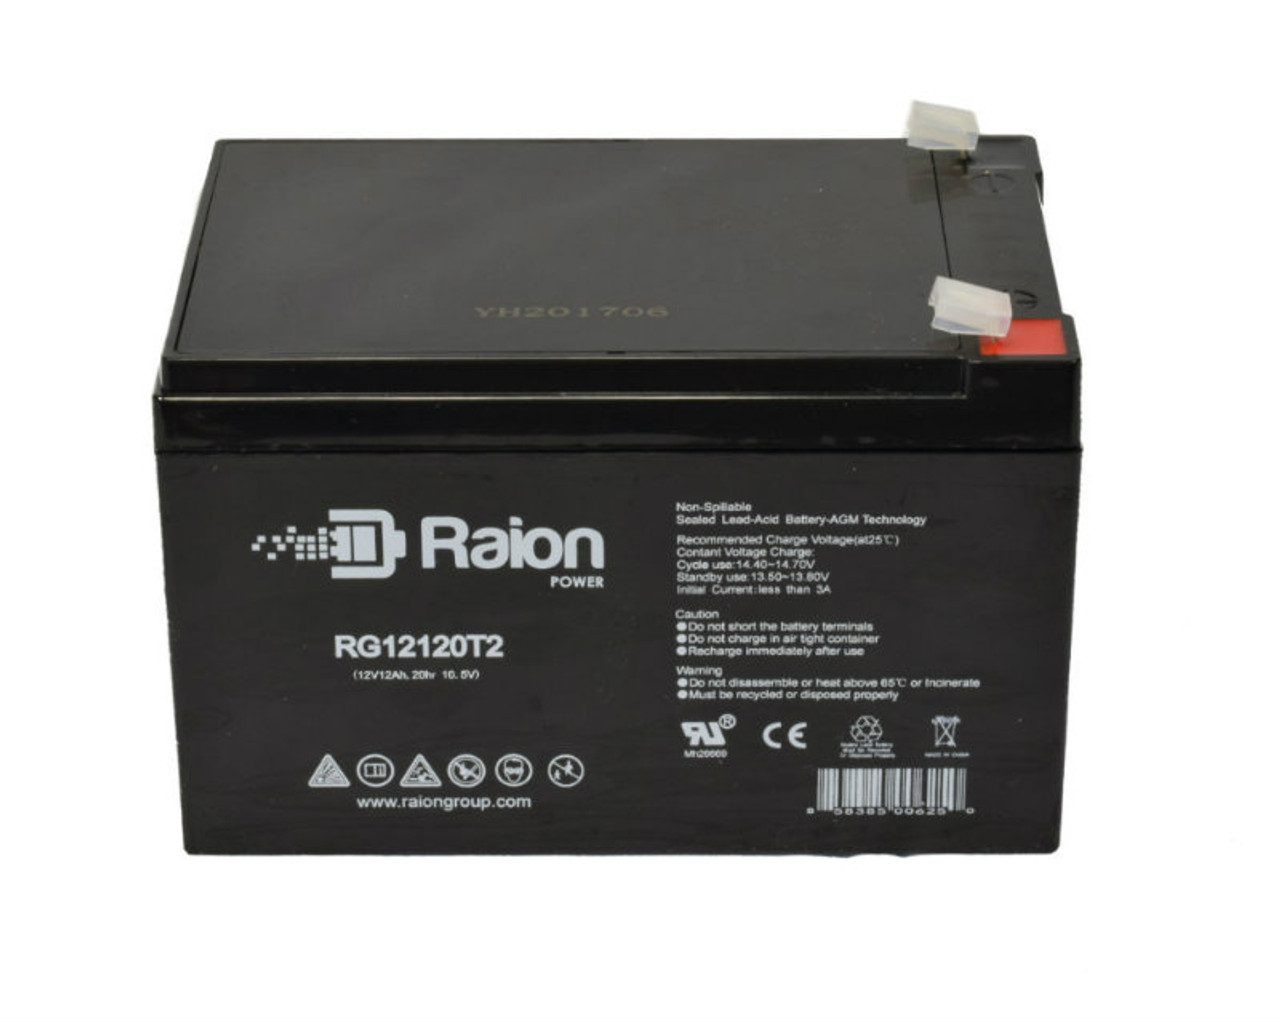 Raion Power RG12120T2 SLA Battery for Drive Medical Design Spitfire Scout 3 Scooter Wheelchairs